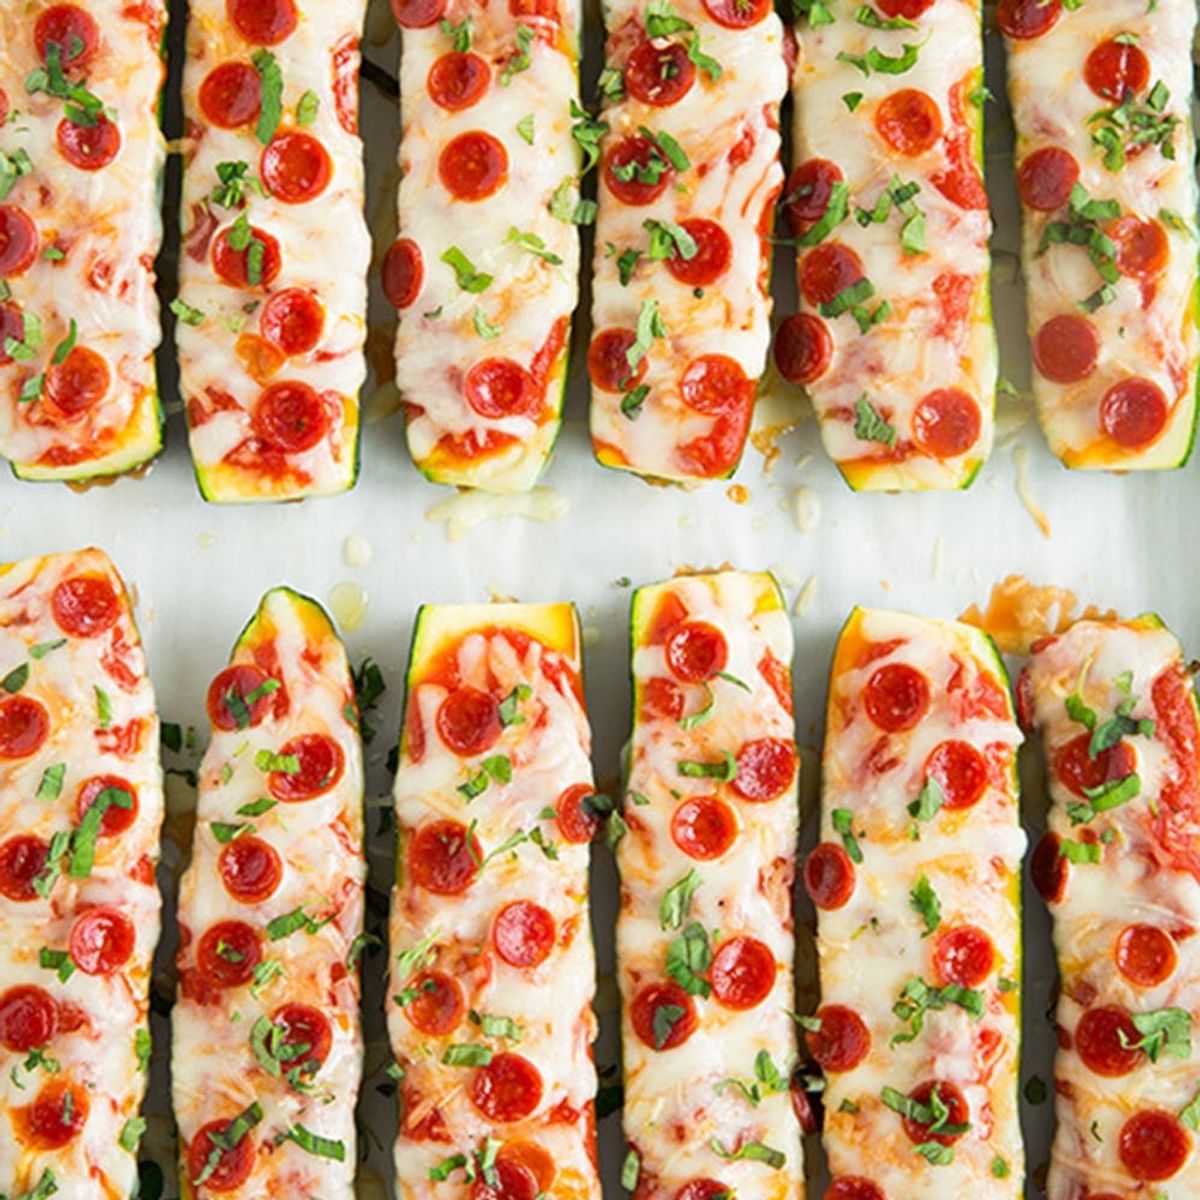 16 Low-Carb and Gluten-Free Stuffed Zucchini Boat Recipes